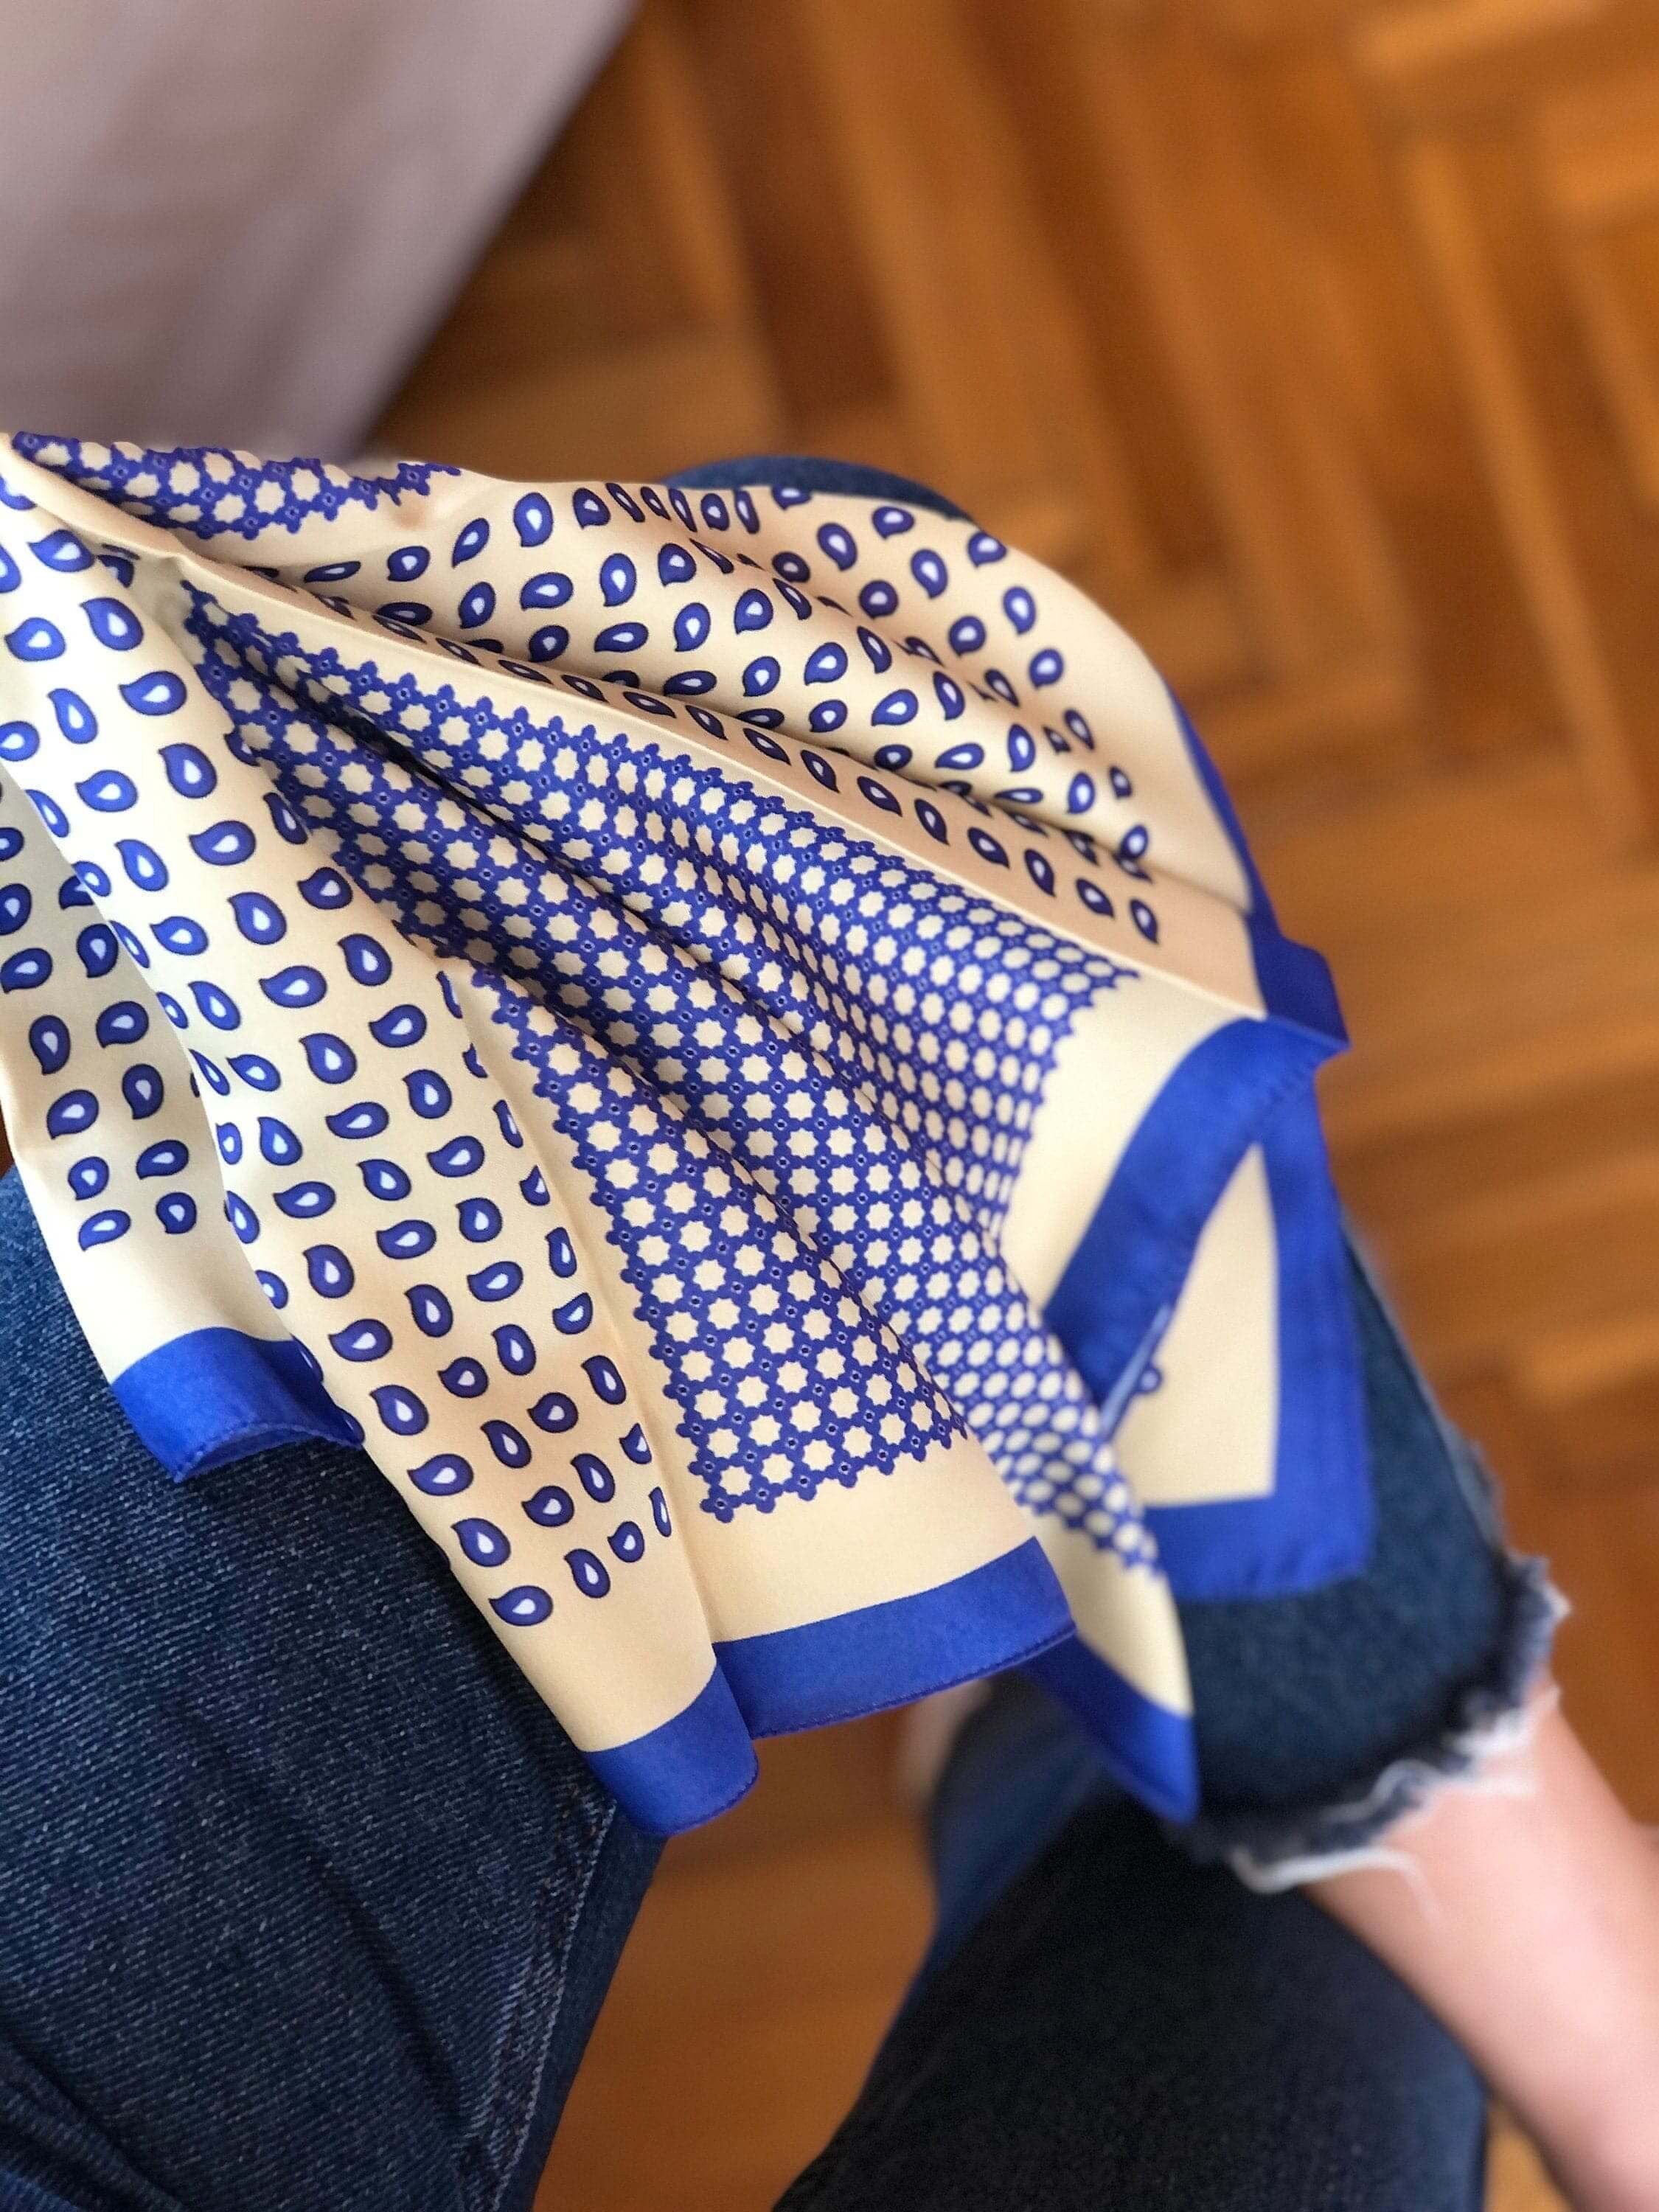 Stay stylish and comfortable with this navy blue and yellow satin scarf. The soft satin material makes it perfect for wearing as a head scarf or neck scarf, adding a touch of sophistication to any outfit.